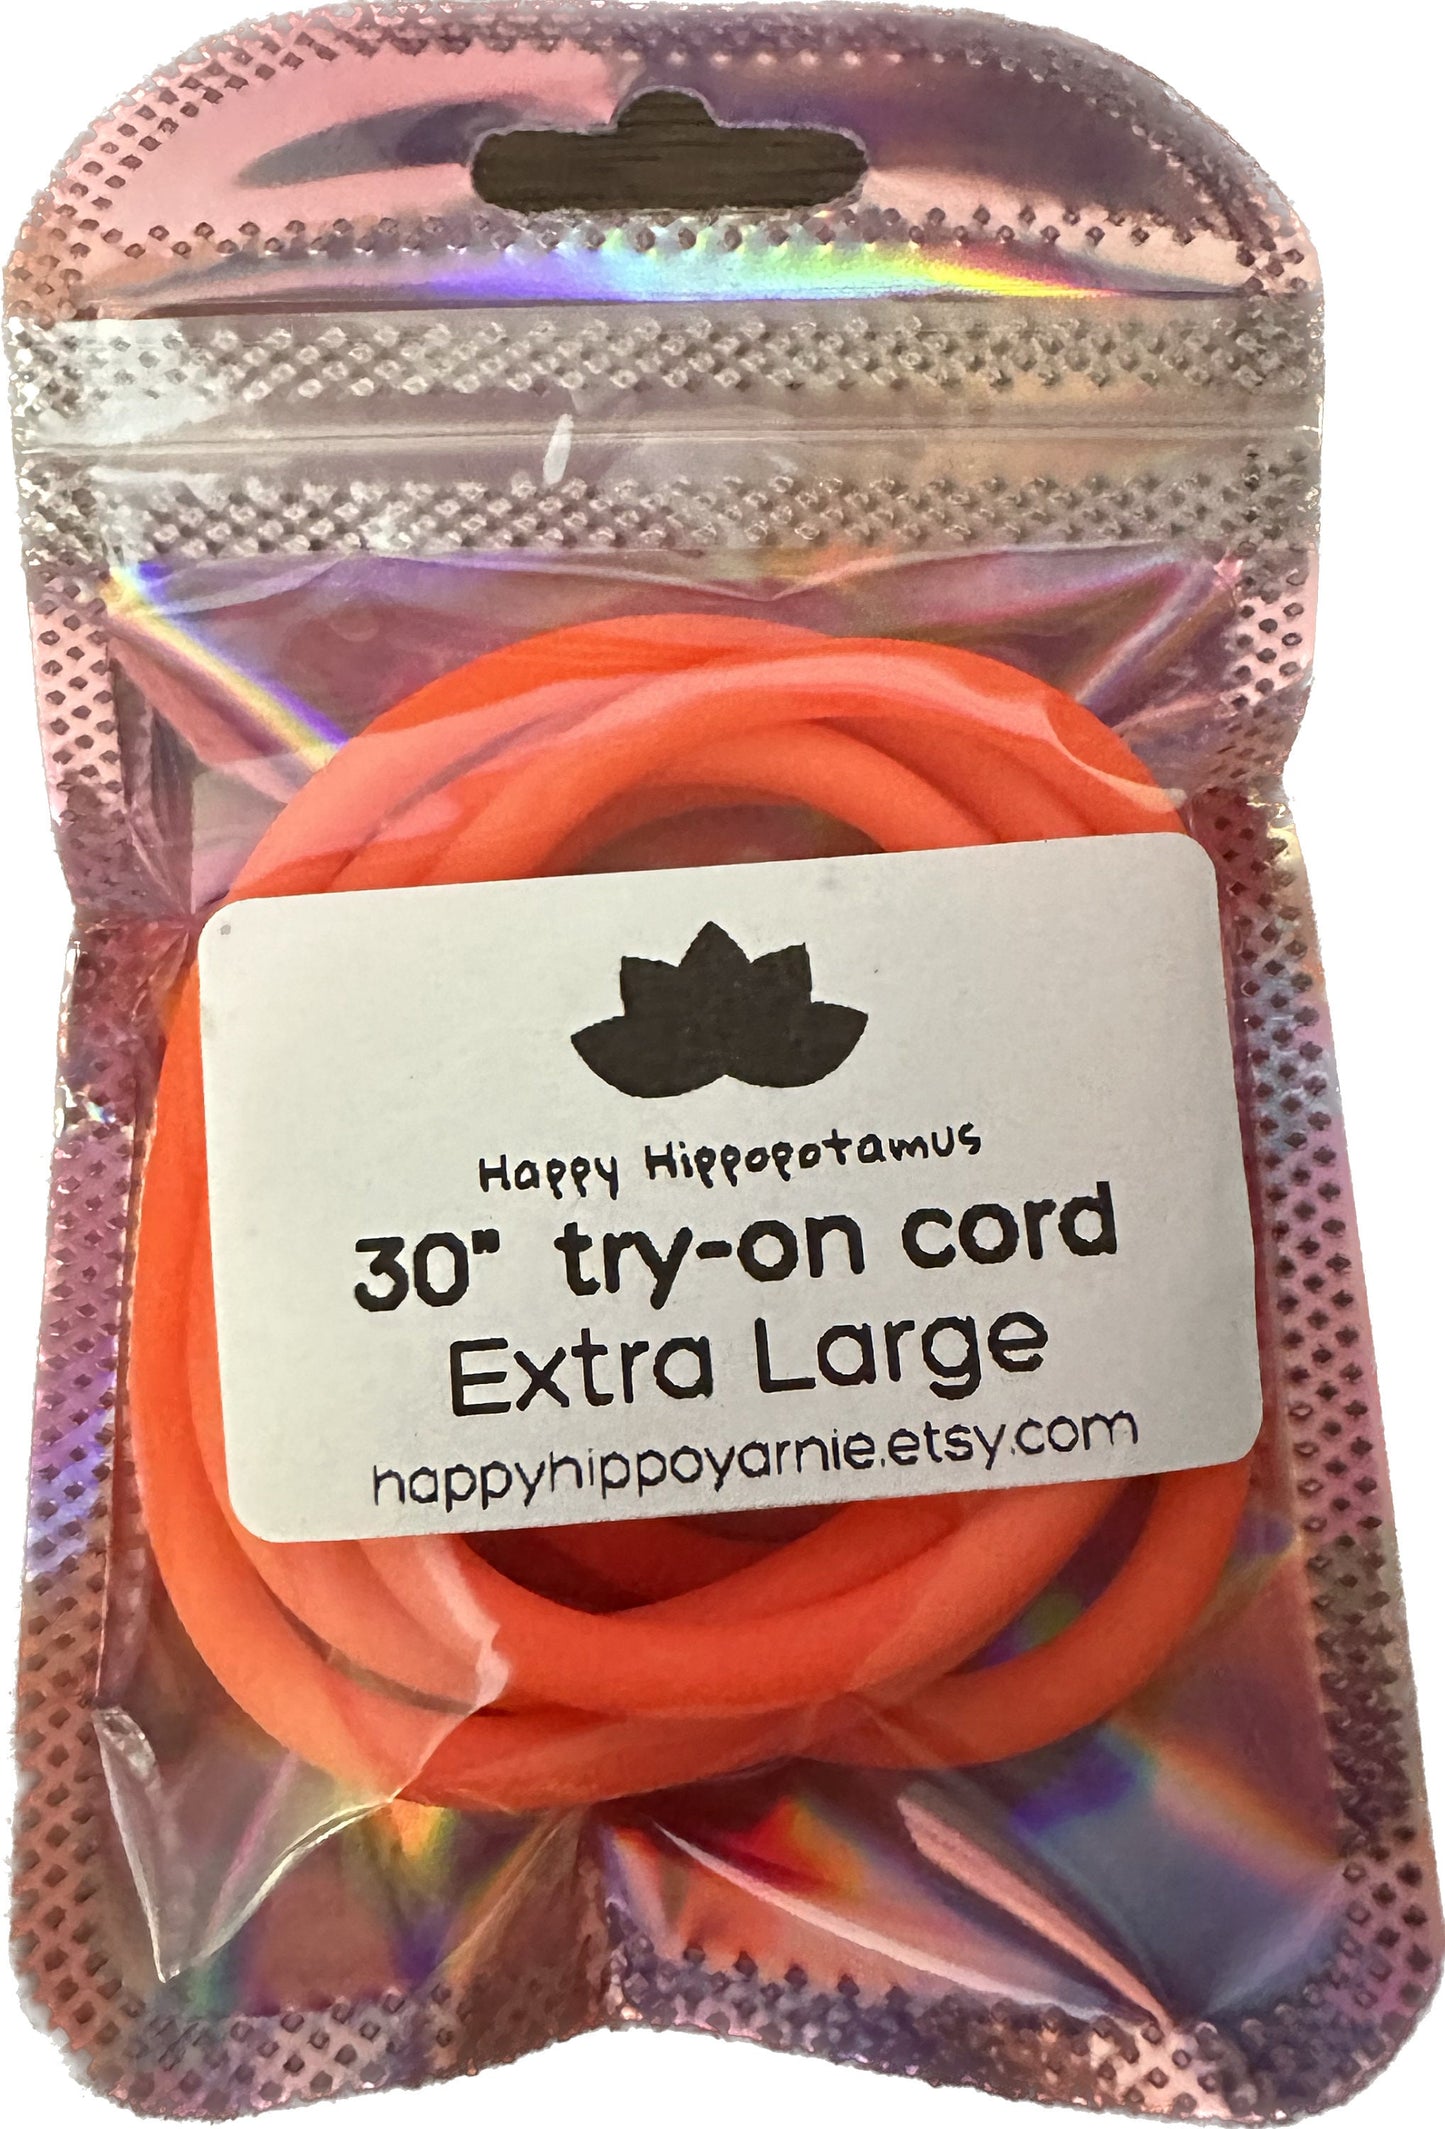 Extra Thick for Largest Needles! Knitting Try-On Cords, Barber Cords, Knitting Stitch Holders, Waste Yarn Alternative, Provisional Cast-On